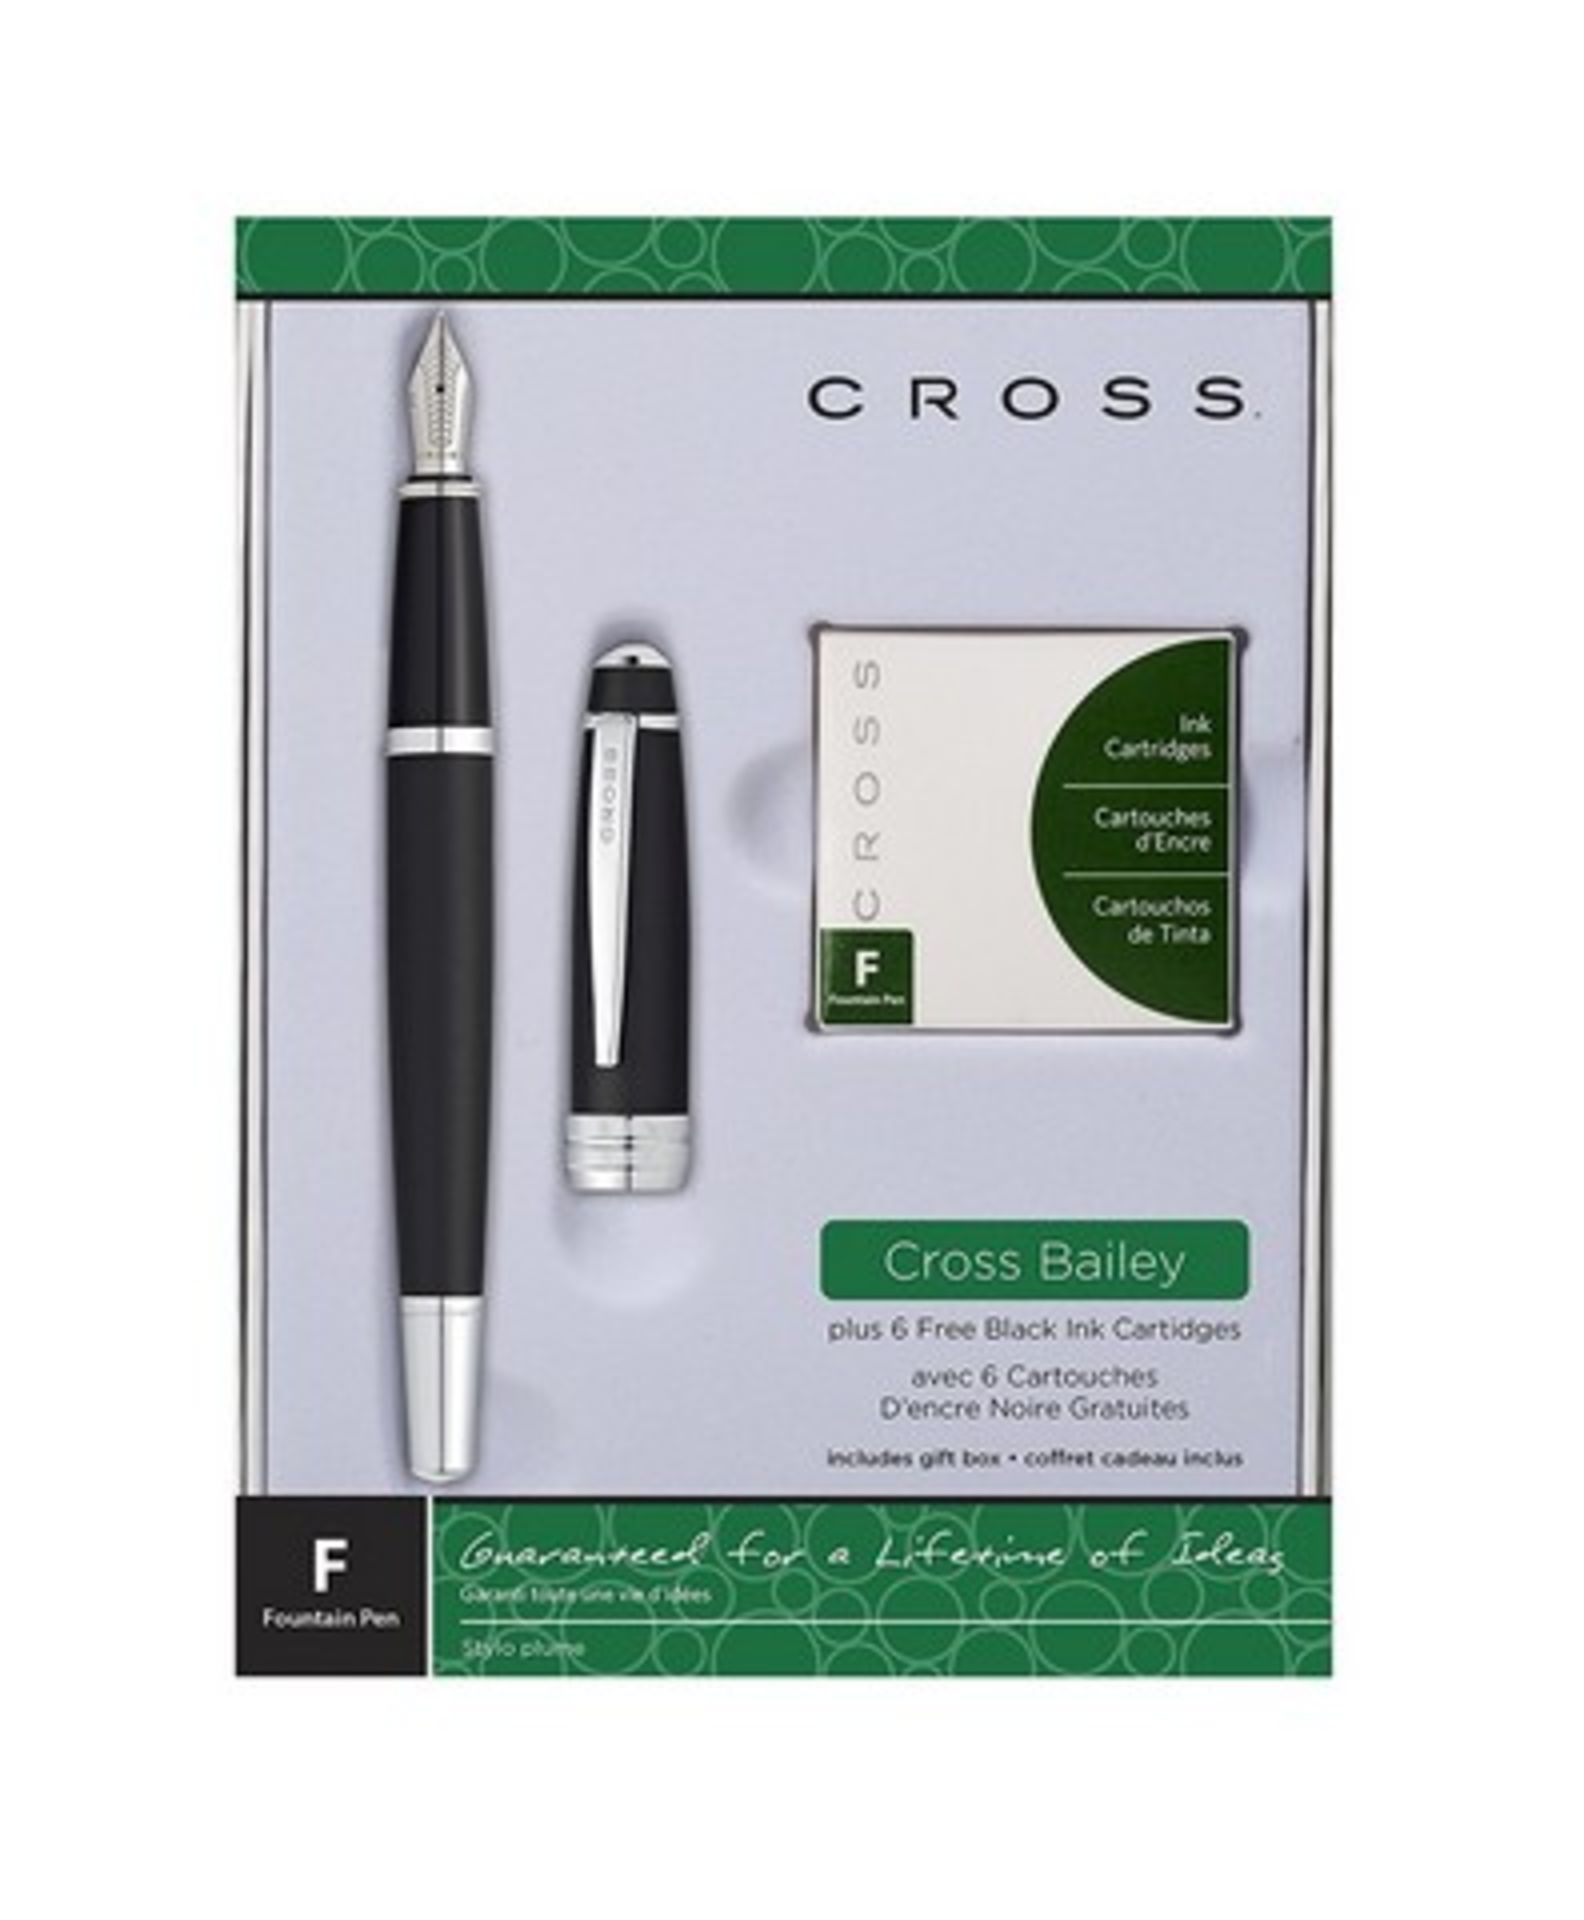 + VAT Brand New Cross Bailey Fountain Pen In Gift Box with 6 Black Ink Cartridges - Online Price £